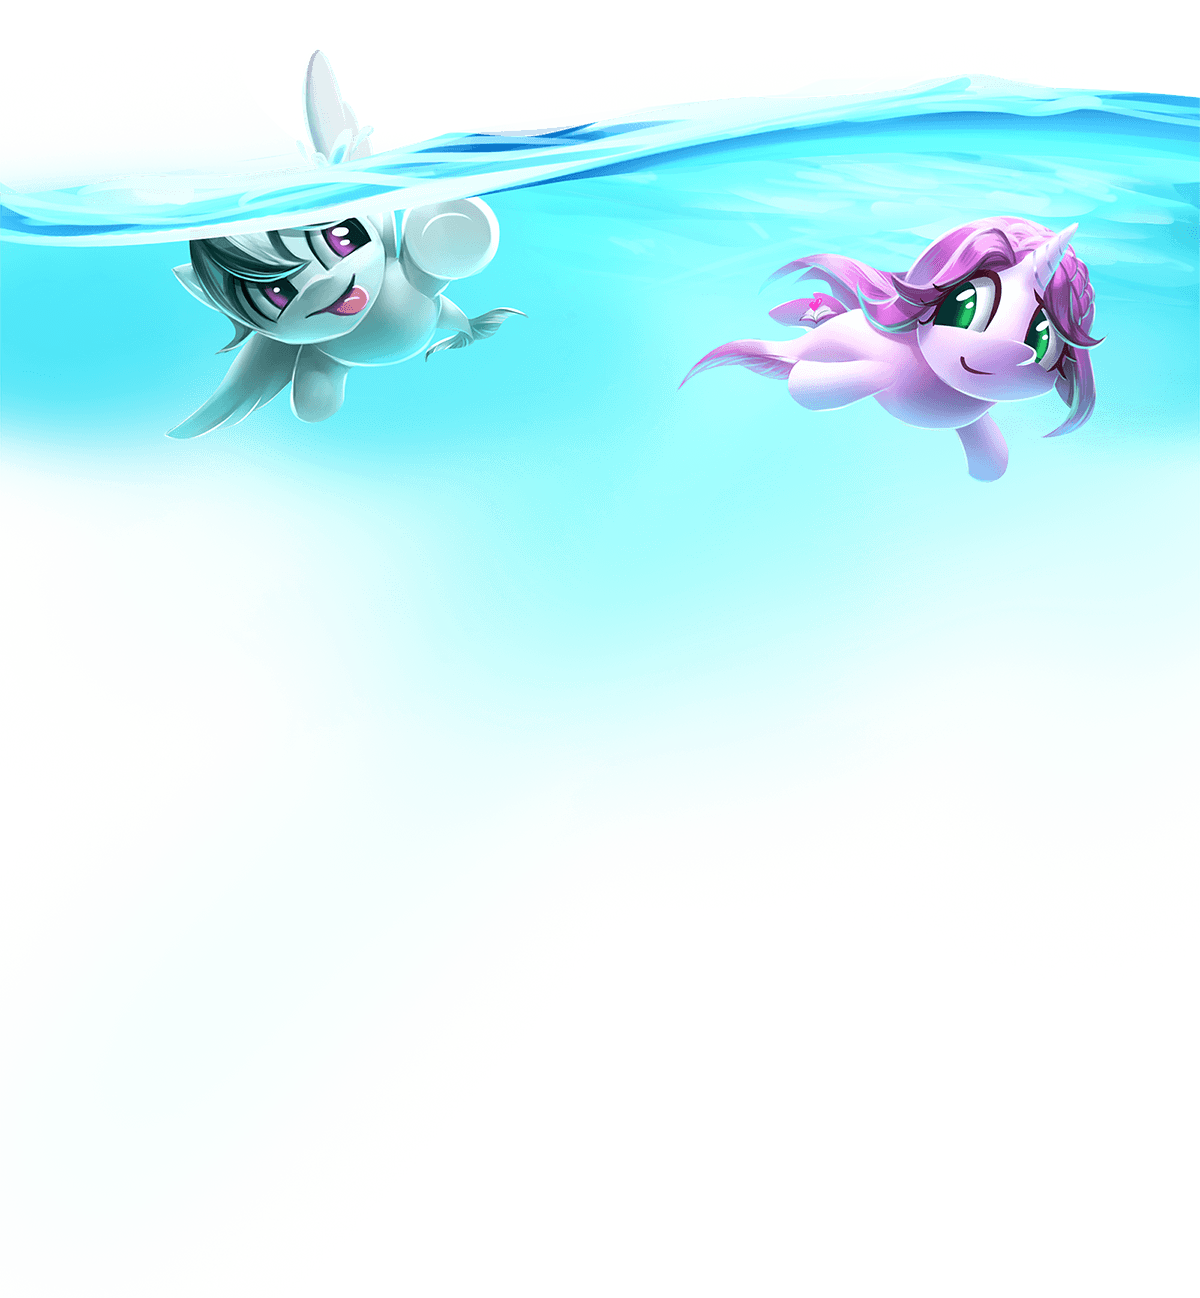 Two of our young mascot ponies, Sharp Focus and Novella, are swimming together beneath the surface of the ocean